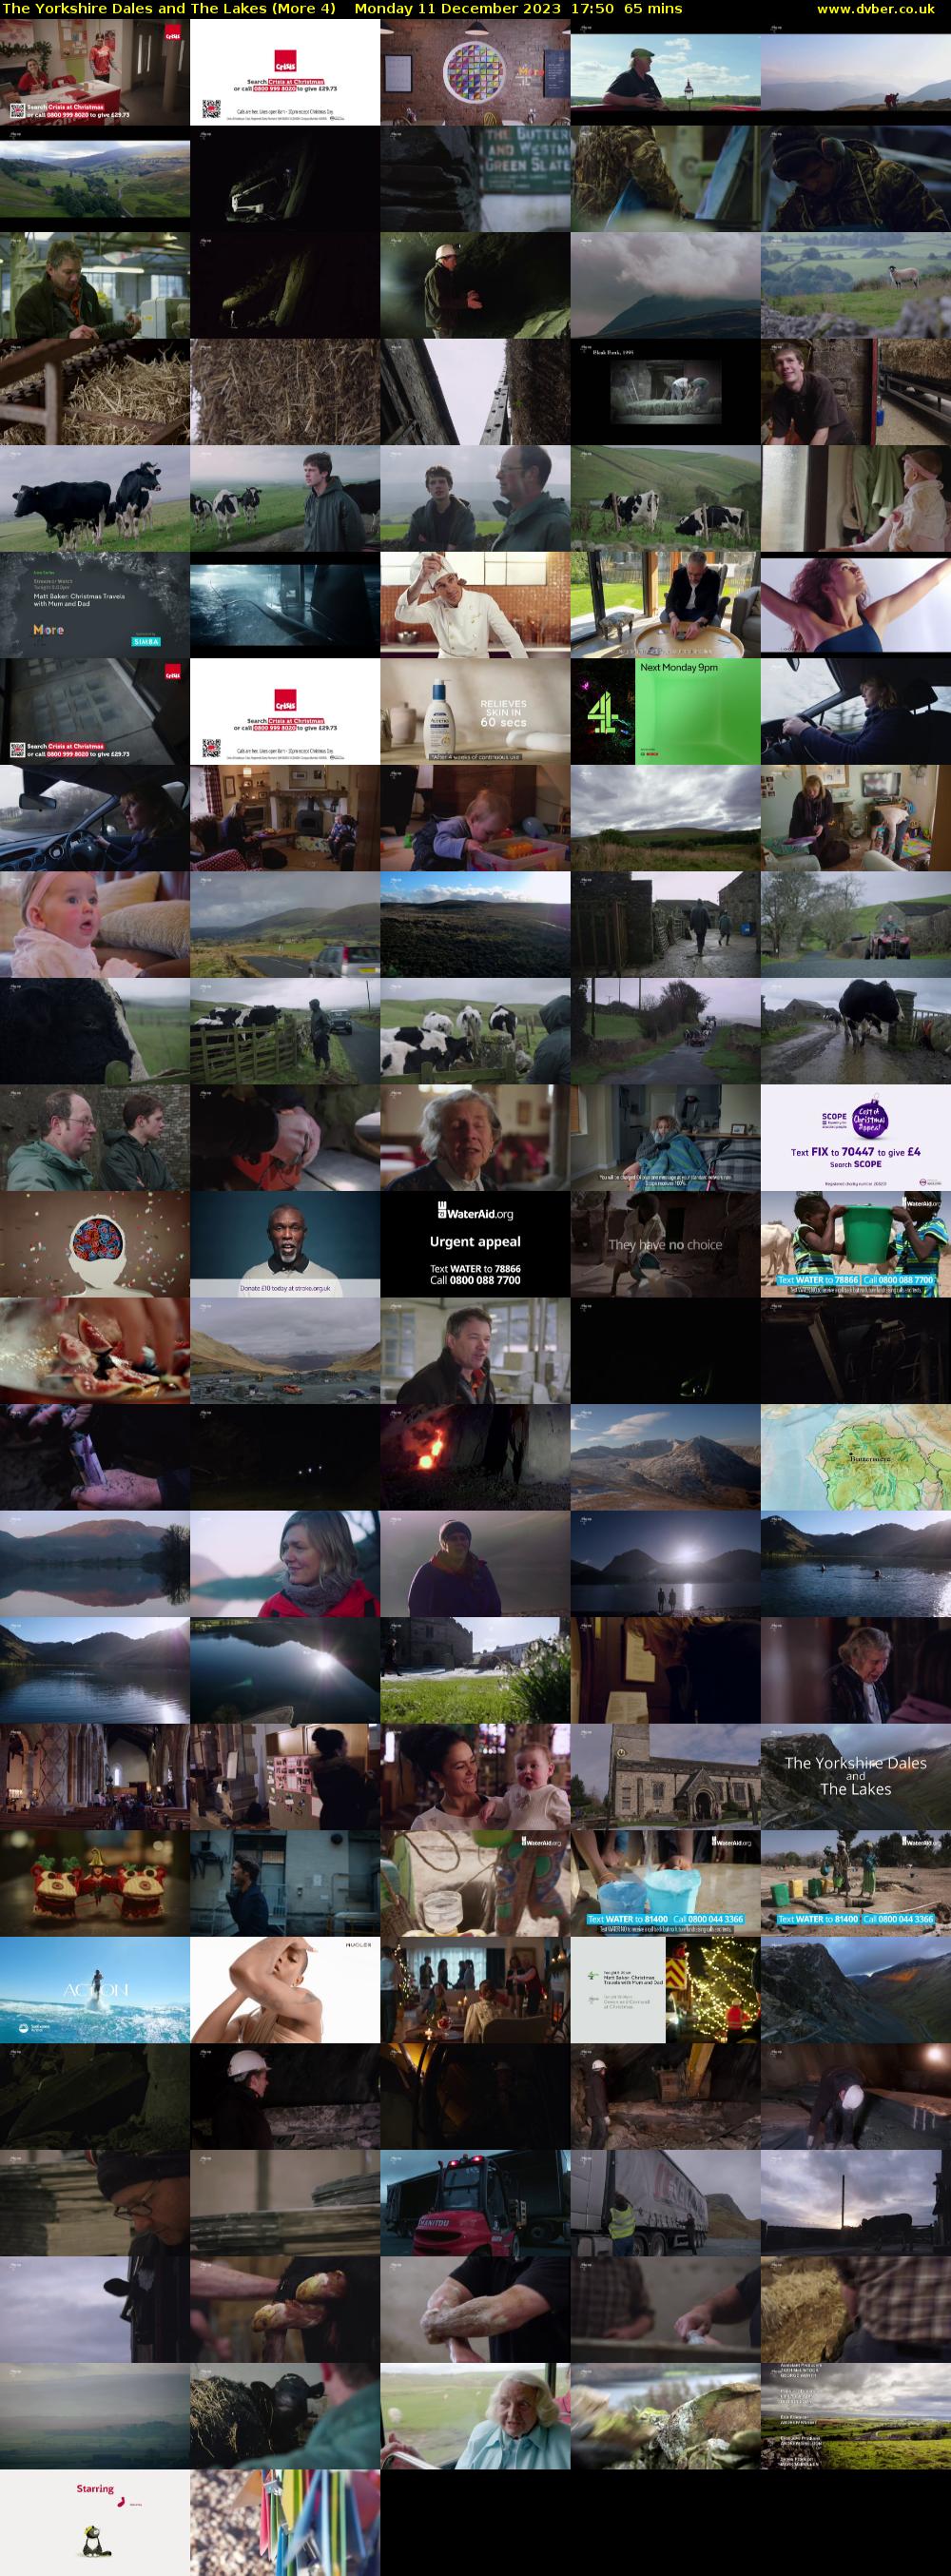 The Yorkshire Dales and The Lakes (More 4) Monday 11 December 2023 17:50 - 18:55